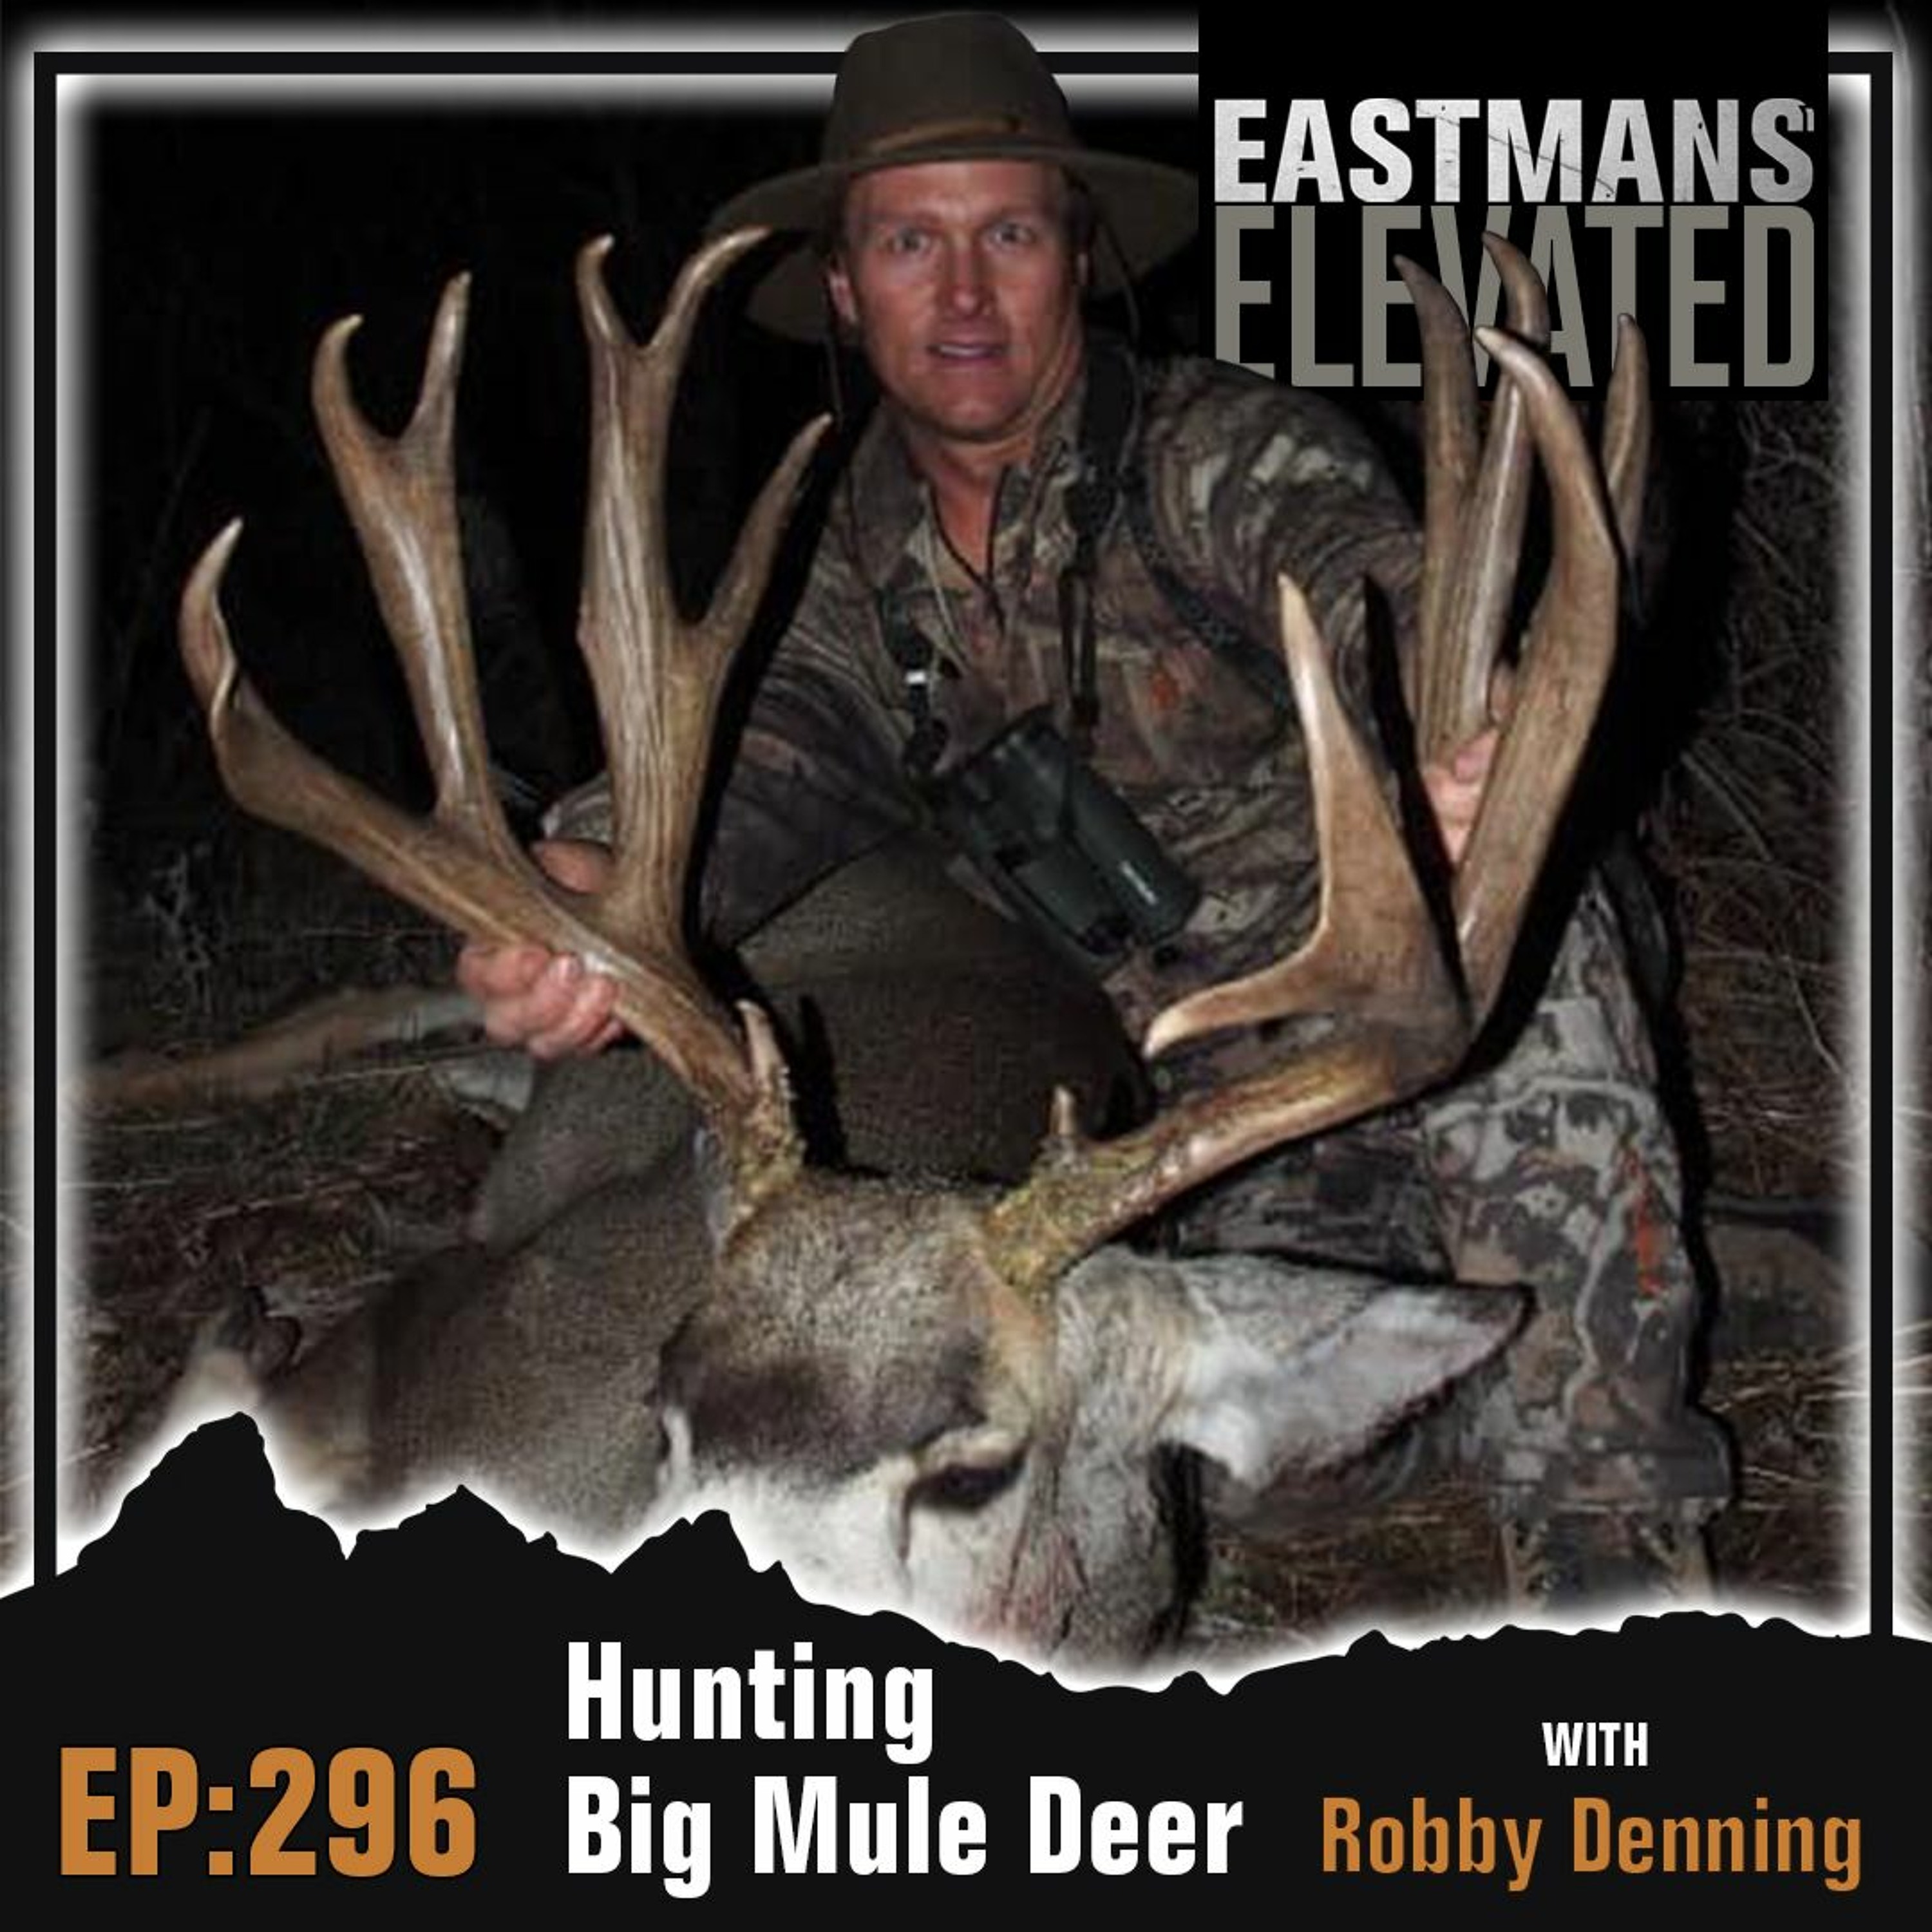 Episode 296: Hunting Big Mule Deer with Robby Denning